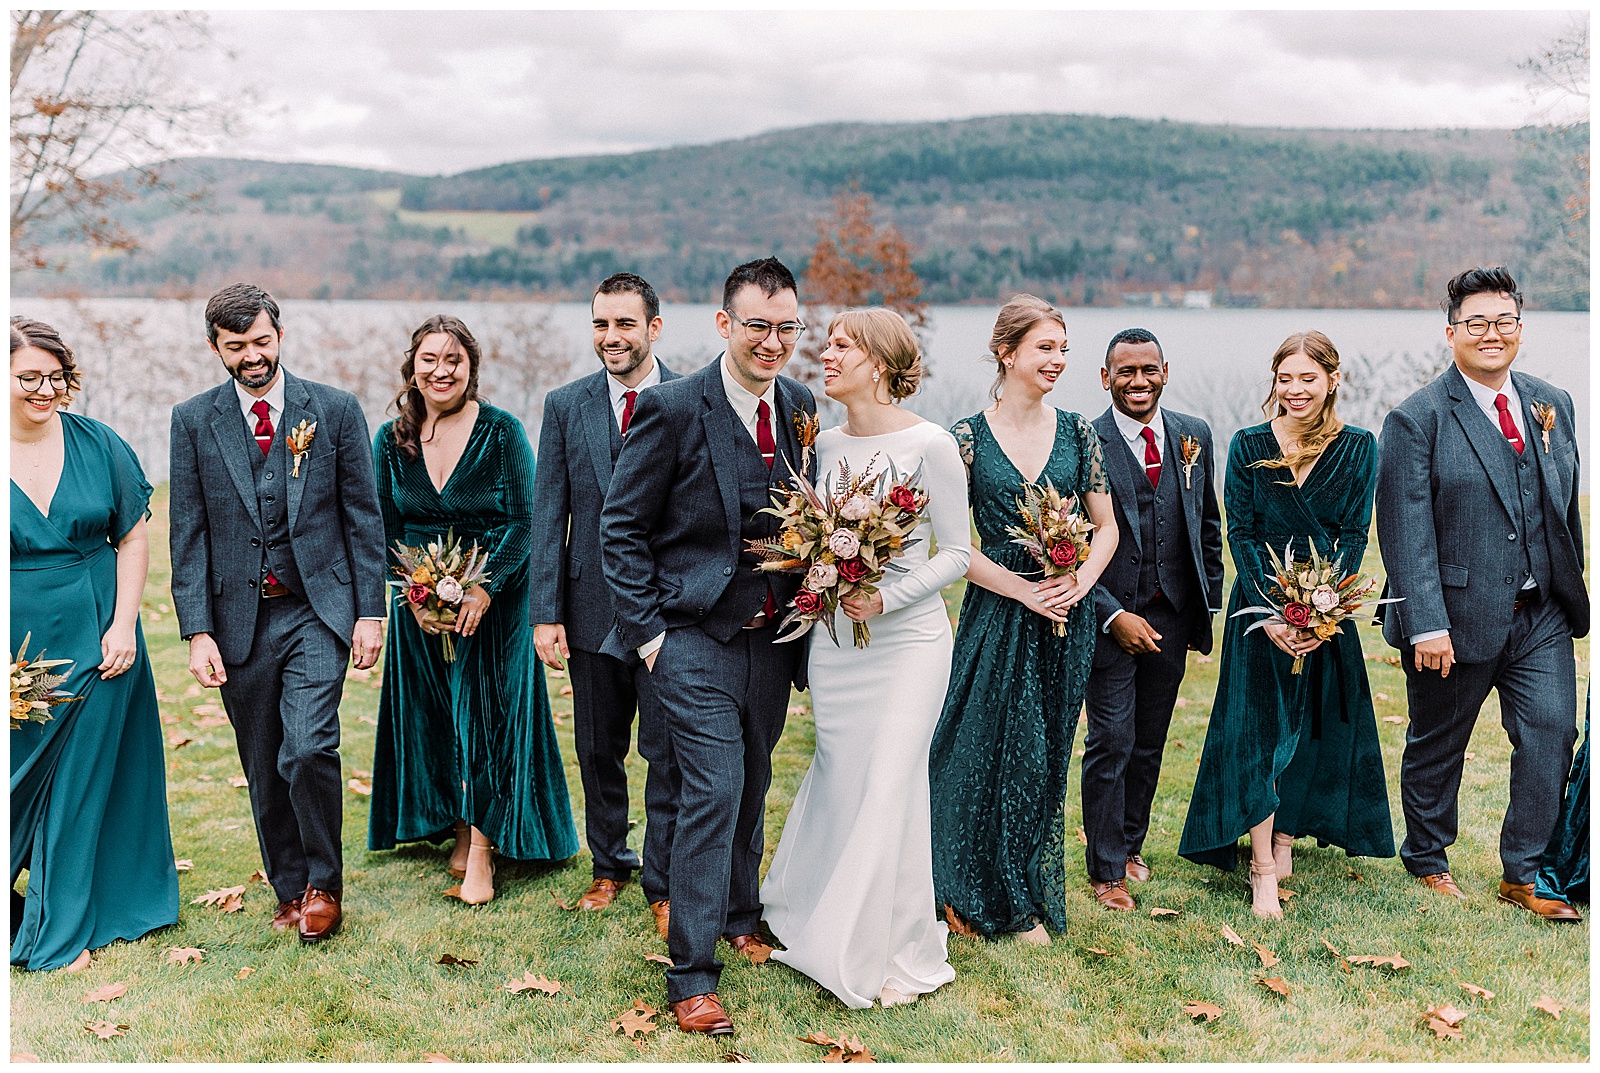 The Farmers' Museum - Venue - Cooperstown, NY - WeddingWire